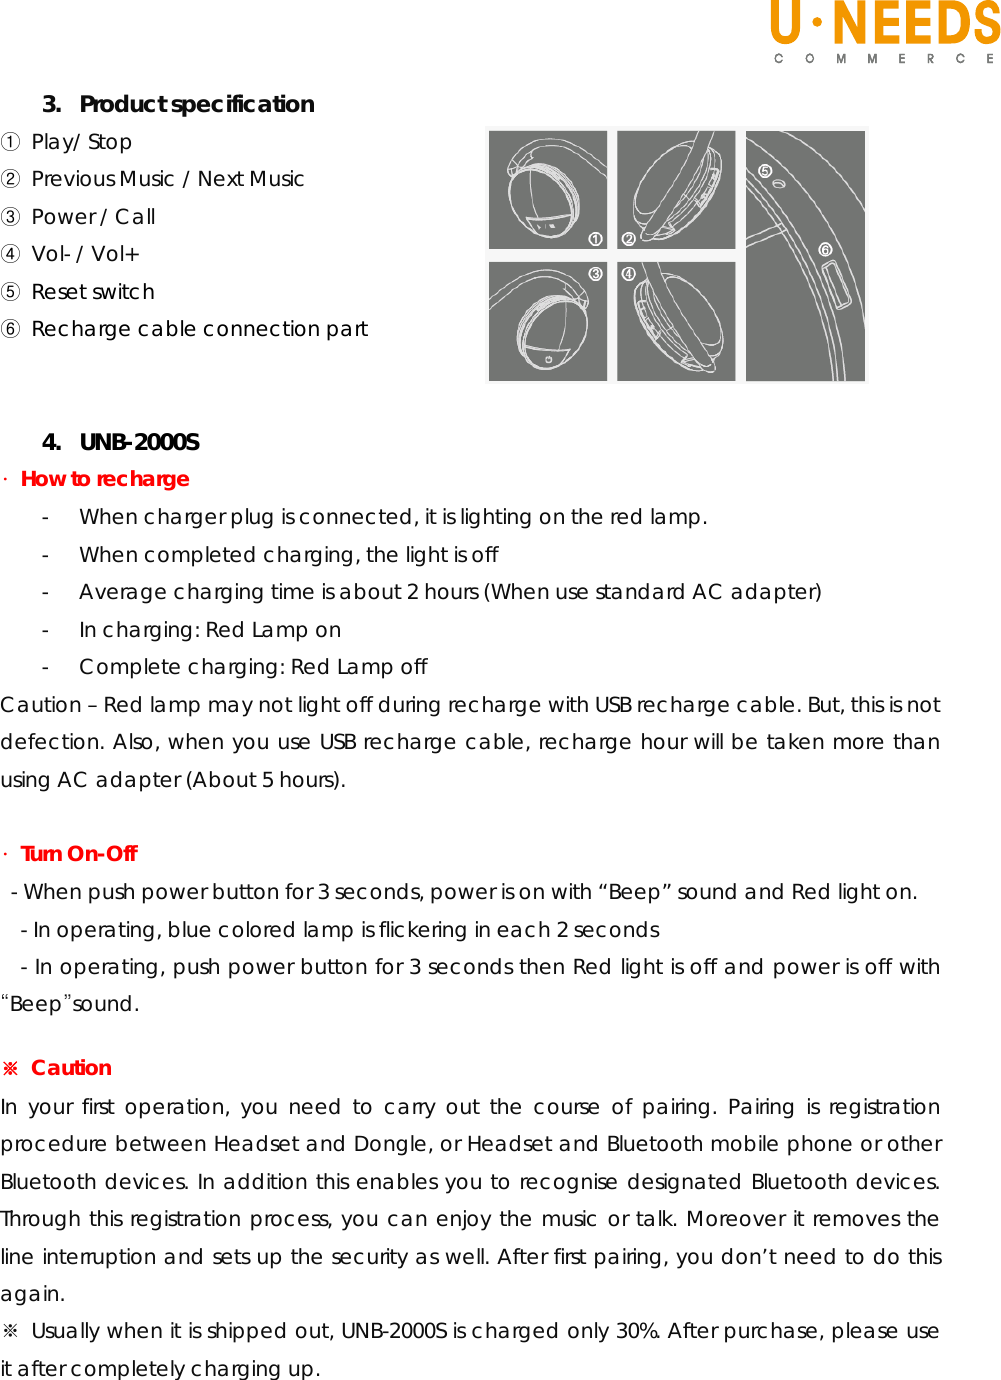   3. Product specification ① Play/ Stop ② Previous Music / Next Music ③ Power / Call ④ Vol- / Vol+ ⑤ Reset switch ⑥  Recharge cable connection part   4. UNB-2000S ∙ How to recharge - When charger plug is connected, it is lighting on the red lamp. - When completed charging, the light is off - Average charging time is about 2 hours (When use standard AC adapter) - In charging: Red Lamp on - Complete charging: Red Lamp off Caution – Red lamp may not light off during recharge with USB recharge cable. But, this is not defection. Also, when you use USB recharge cable, recharge hour will be taken more than using AC adapter (About 5 hours).  ∙ Turn On-Off  - When push power button for 3 seconds, power is on with “Beep” sound and Red light on. - In operating, blue colored lamp is flickering in each 2 seconds - In operating, push power button for 3 seconds then Red light is off and power is off with “Beep”sound.  ※ Caution In your first operation, you need to carry out the course of pairing. Pairing is registration procedure between Headset and Dongle, or Headset and Bluetooth mobile phone or other Bluetooth devices. In addition this enables you to recognise designated Bluetooth devices. Through this registration process, you can enjoy the music or talk. Moreover it removes the line interruption and sets up the security as well. After first pairing, you don’t need to do this again.  ※ Usually when it is shipped out, UNB-2000S is charged only 30%. After purchase, please use it after completely charging up.      